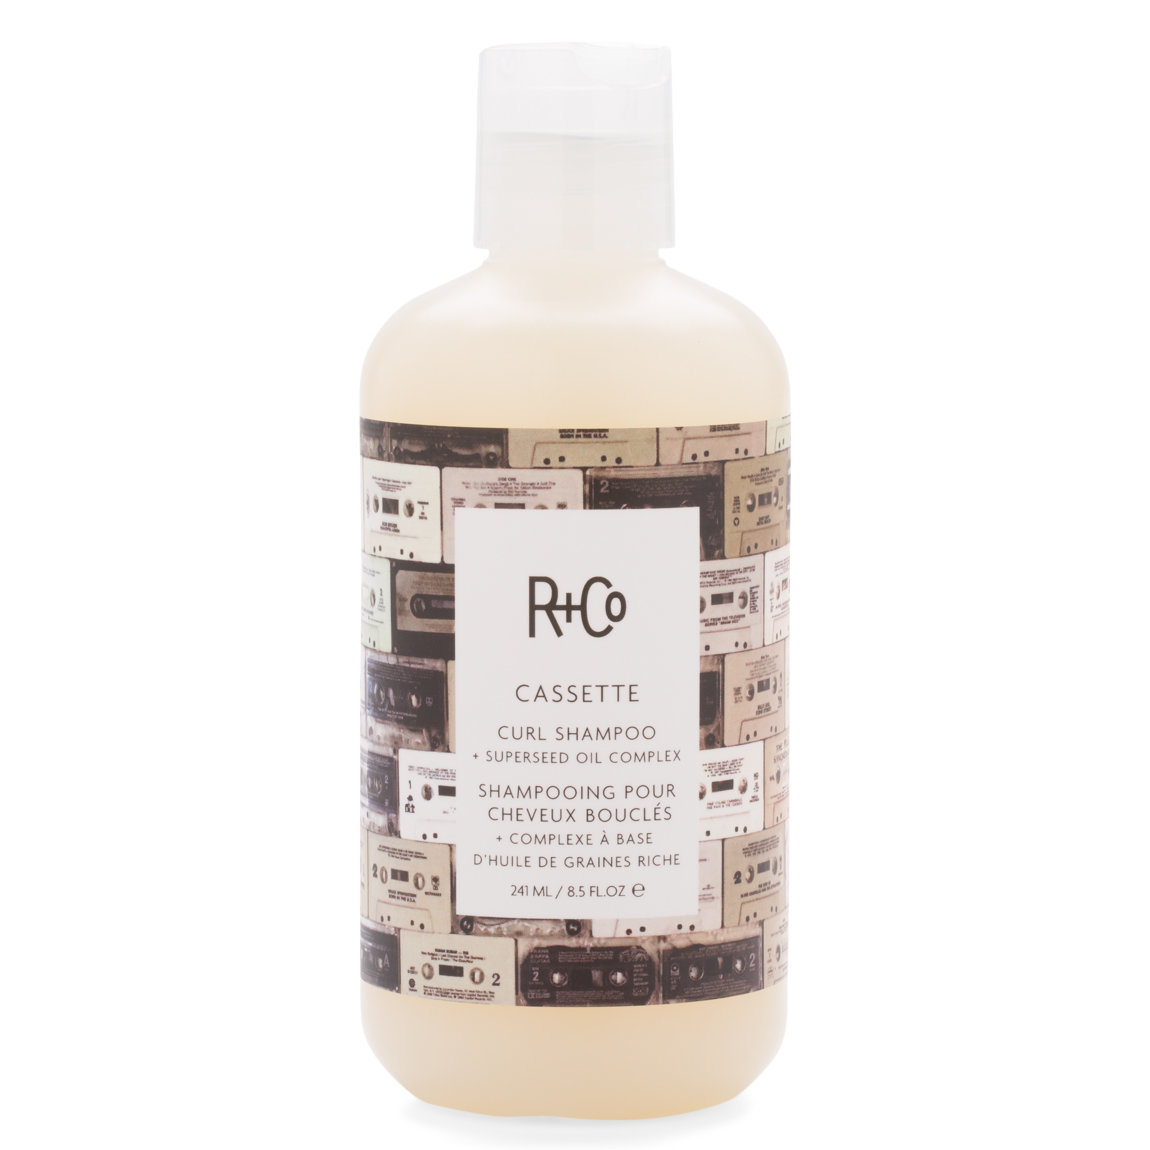 R+Co Cassette Curl Shampoo alternative view 1 - product swatch.